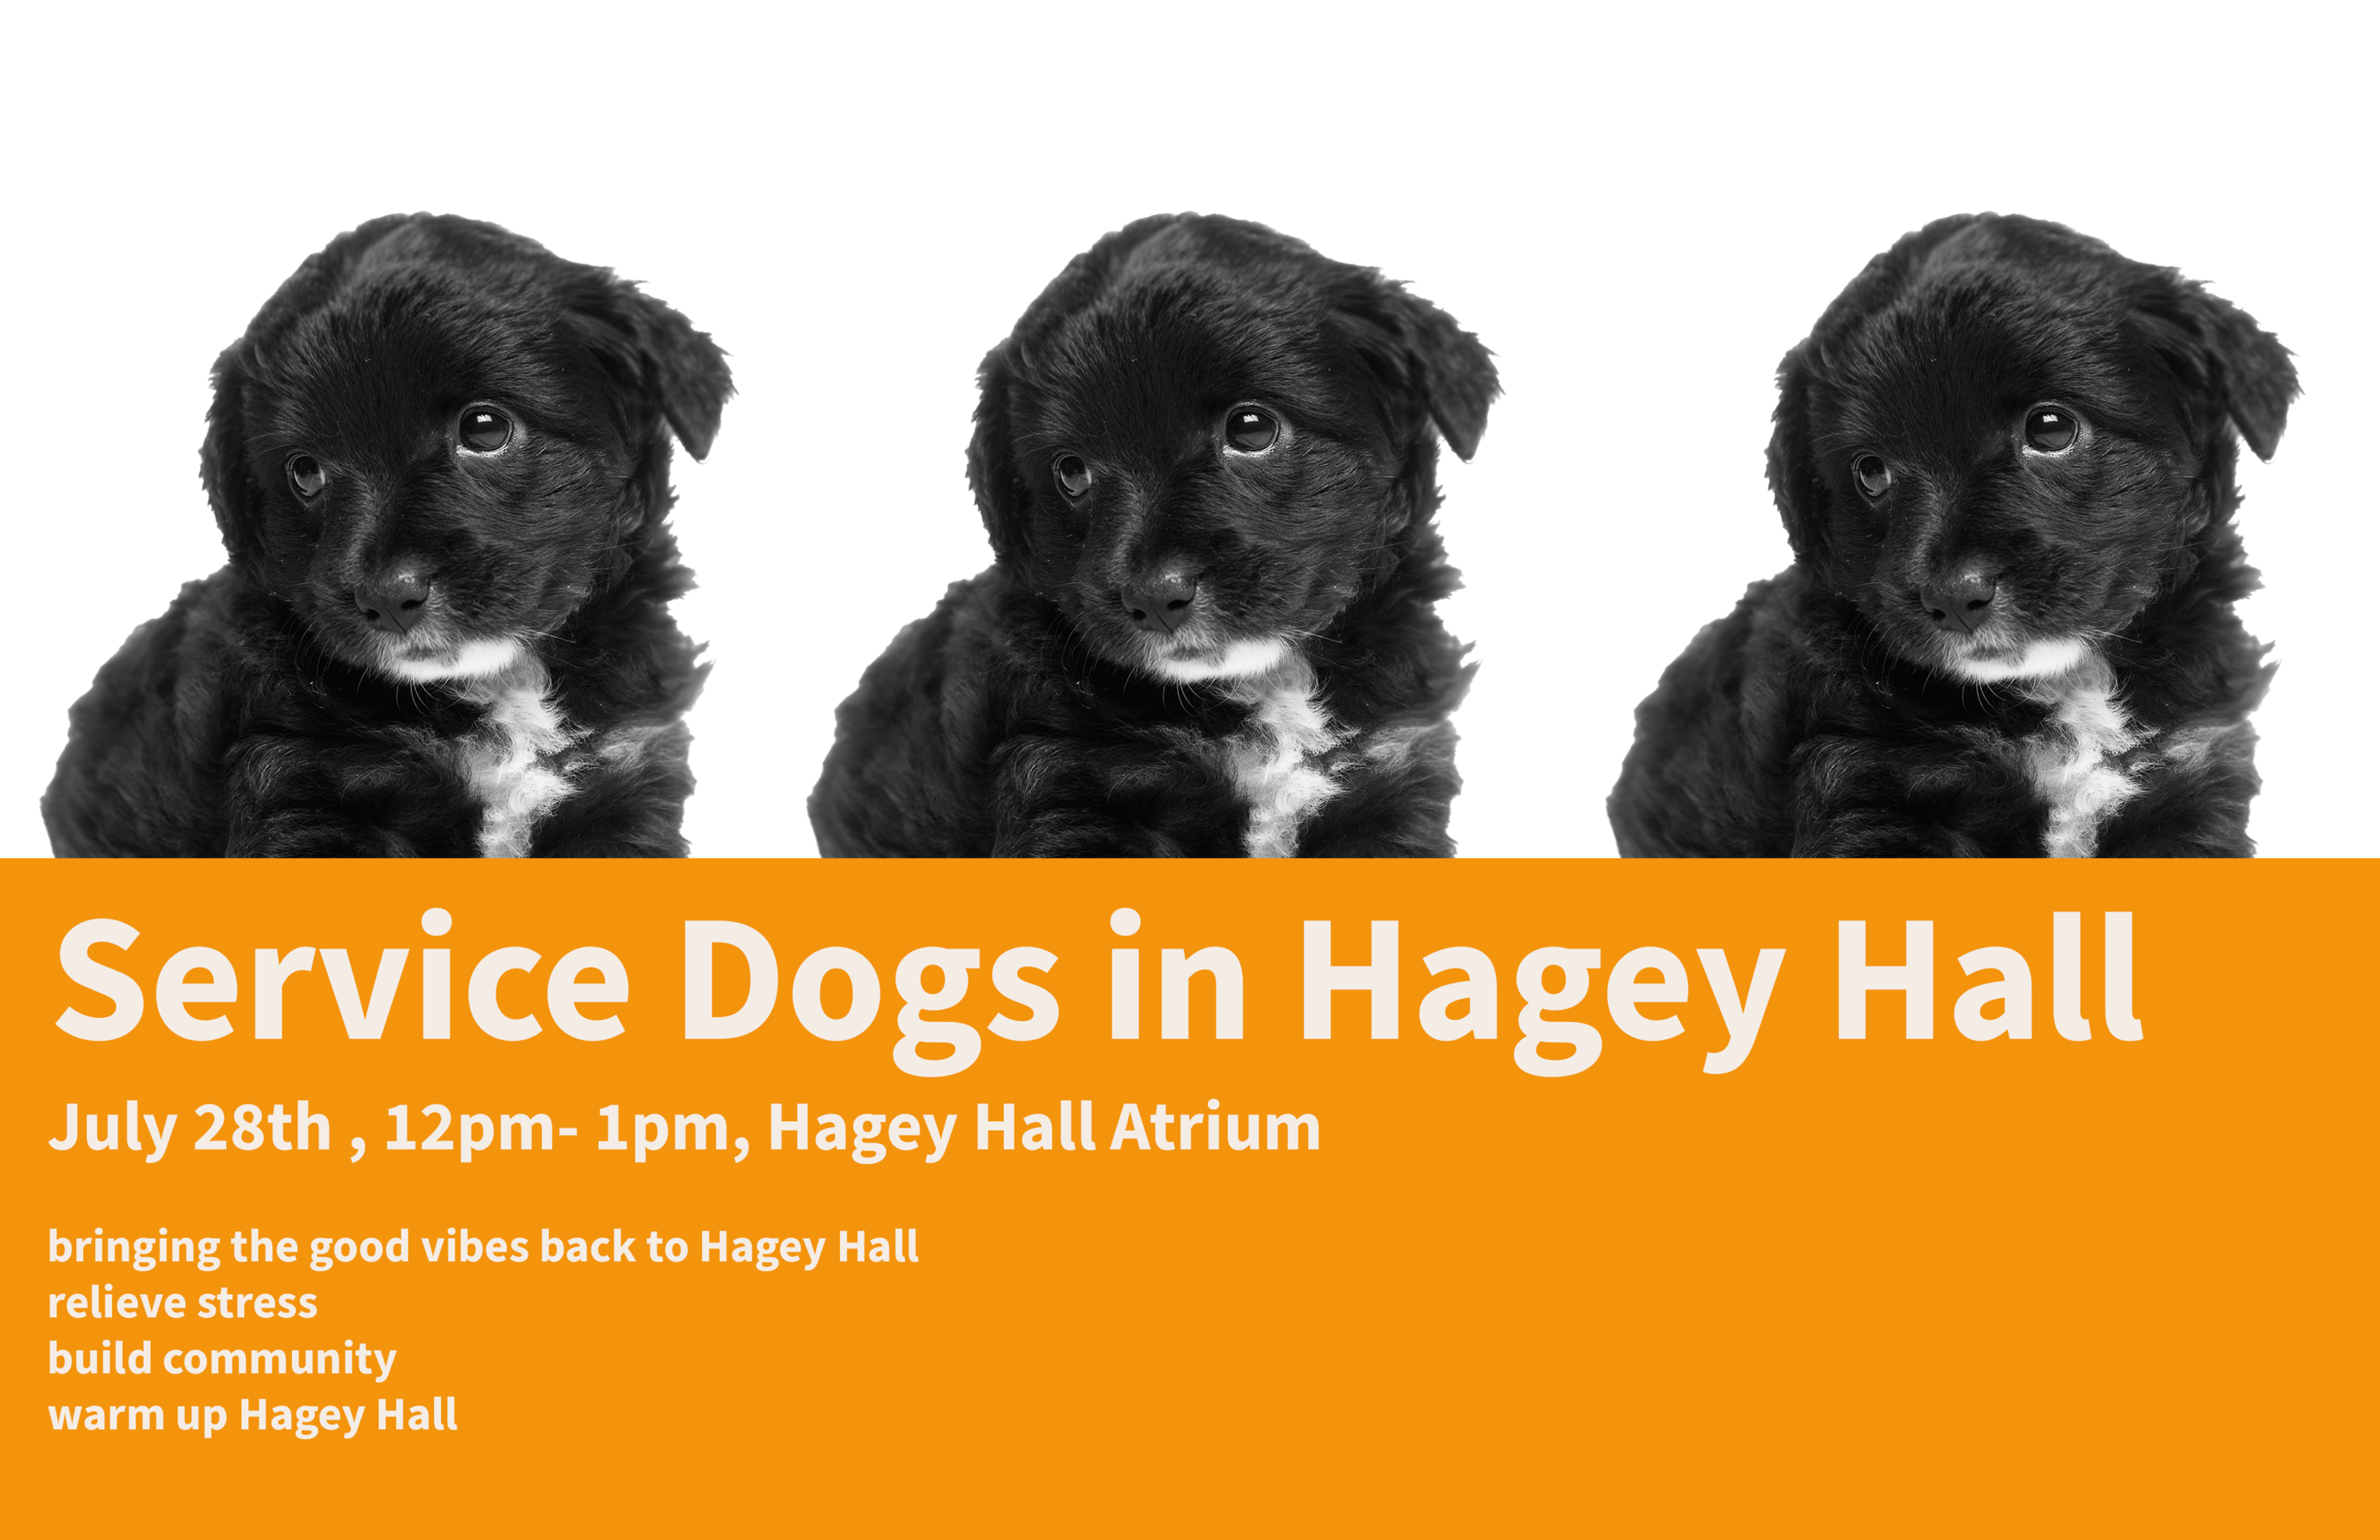 Service Dogs in Hagey Hall July 28